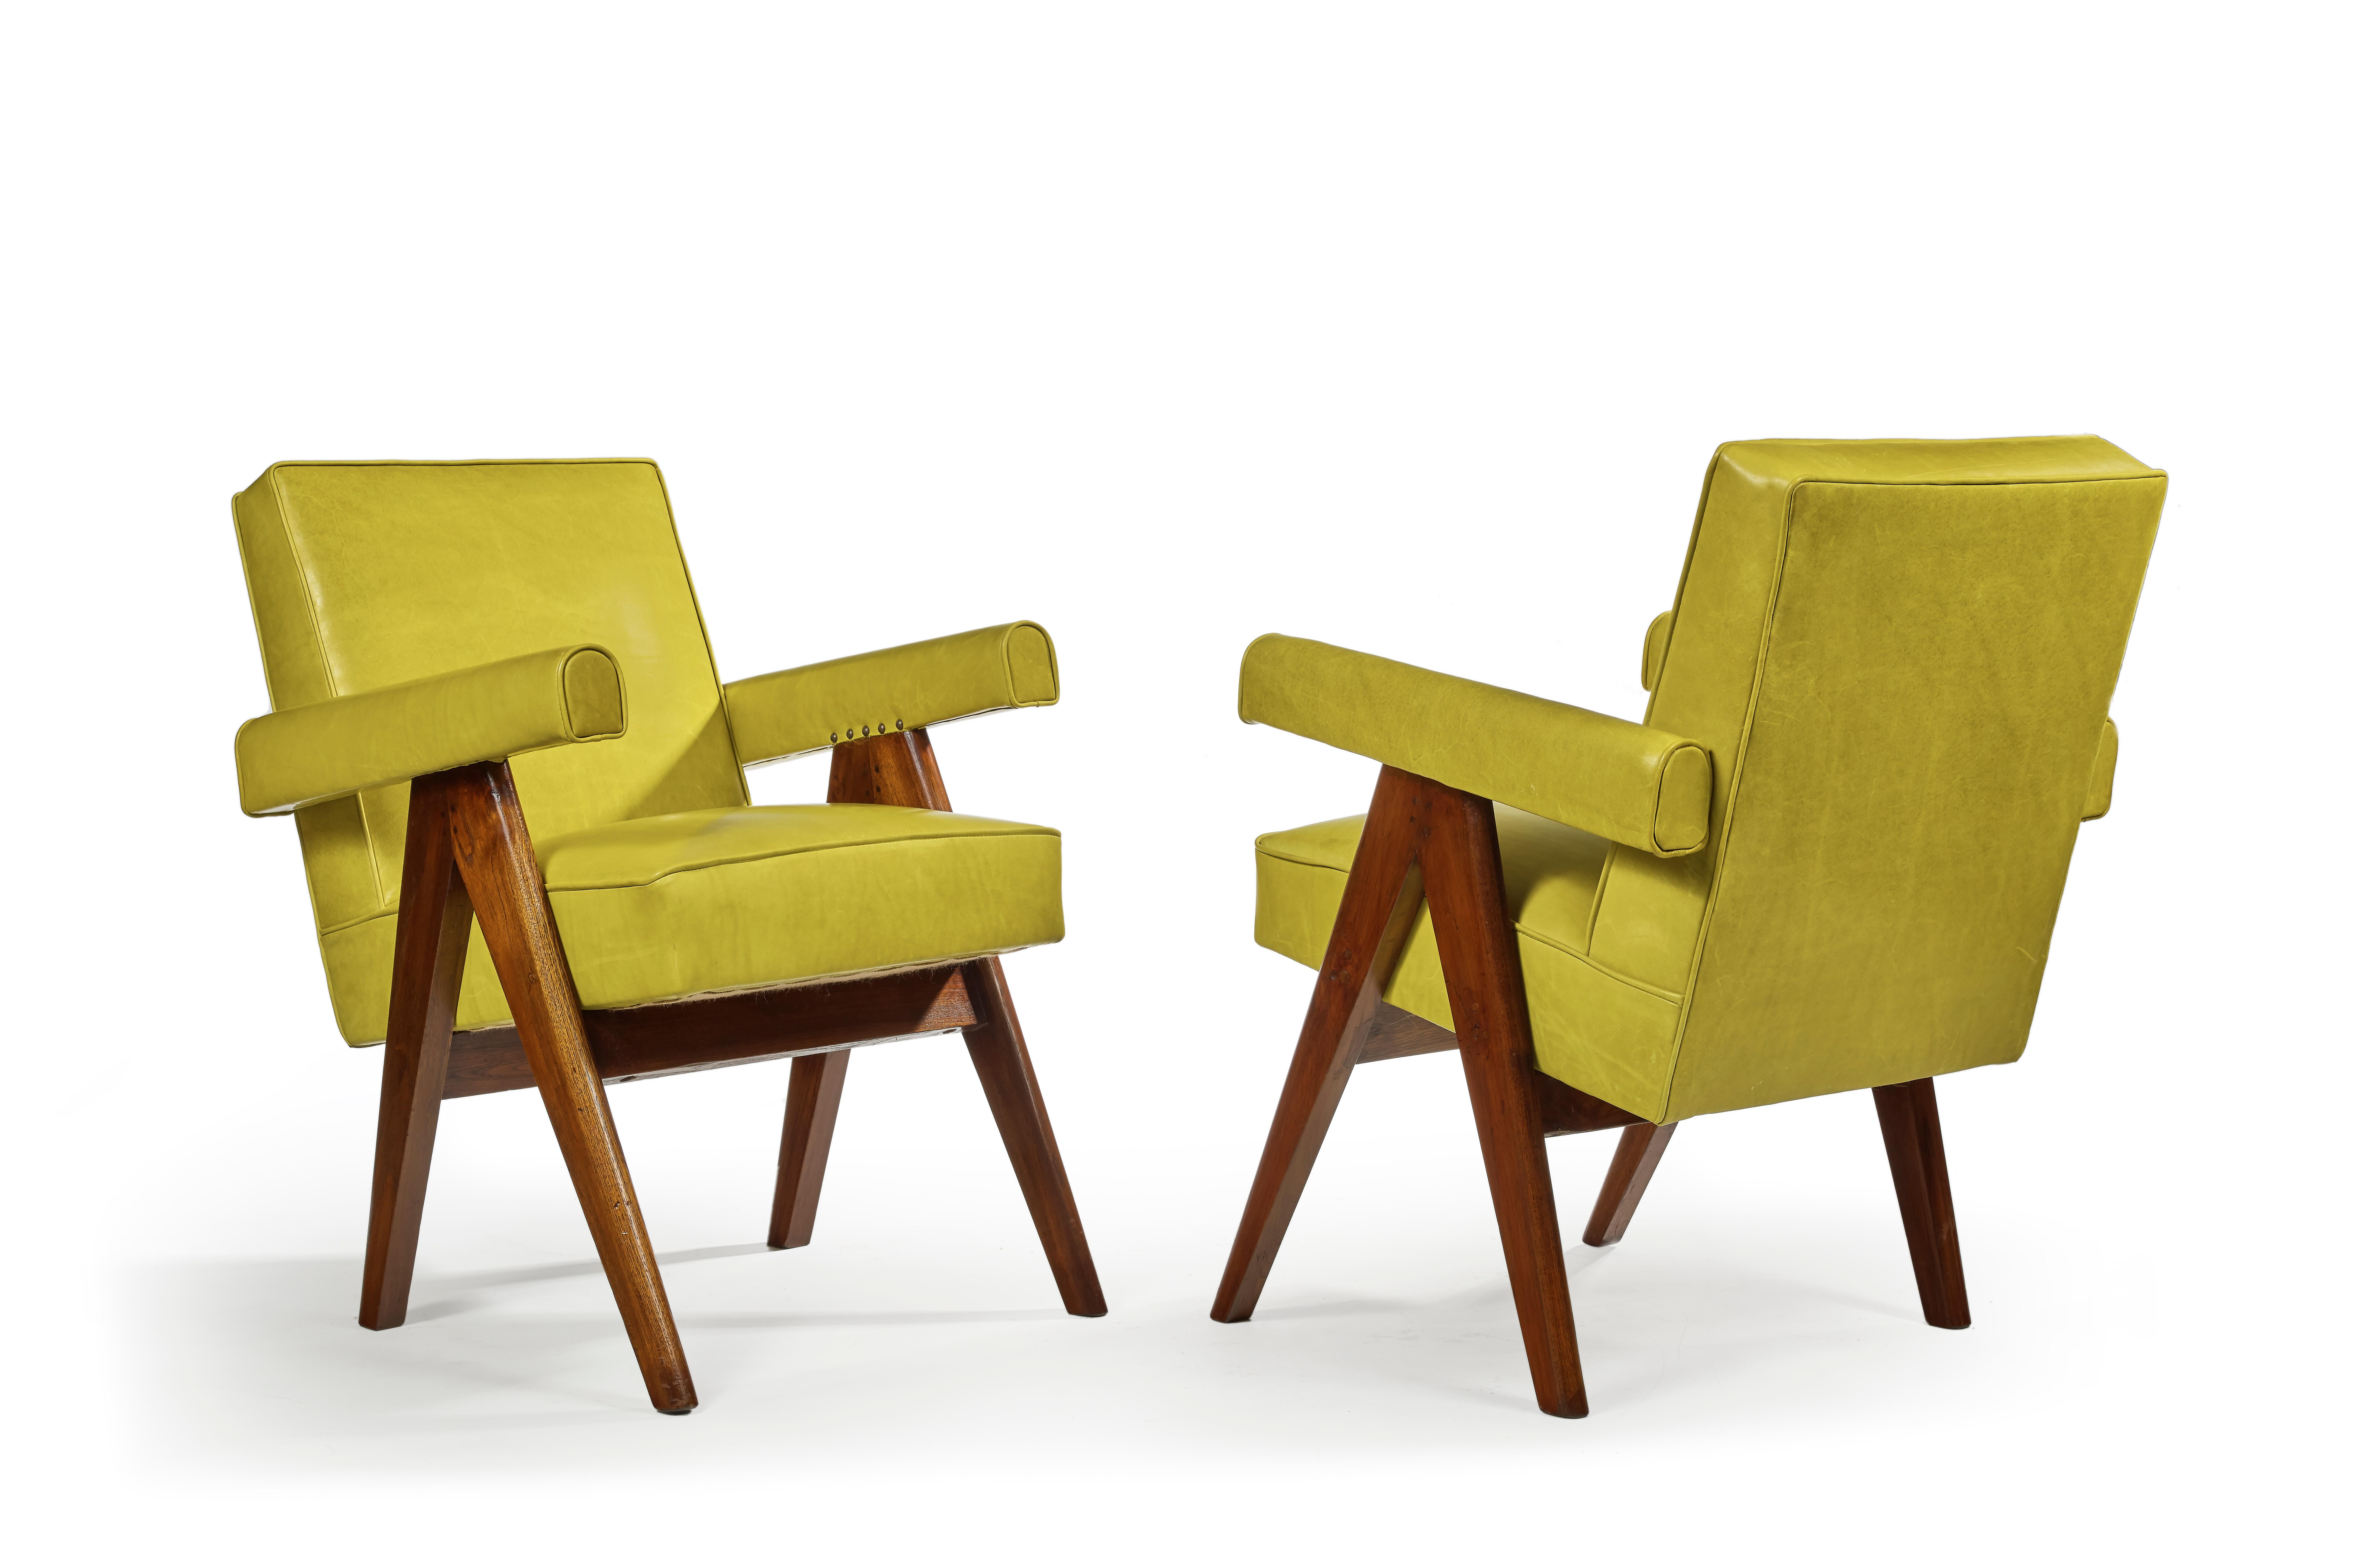 Mid-20th Century Pierre Jeanneret, PJ-SI-30-D, Committee Armchairs, A Pair, Chandigarh, C. 1955